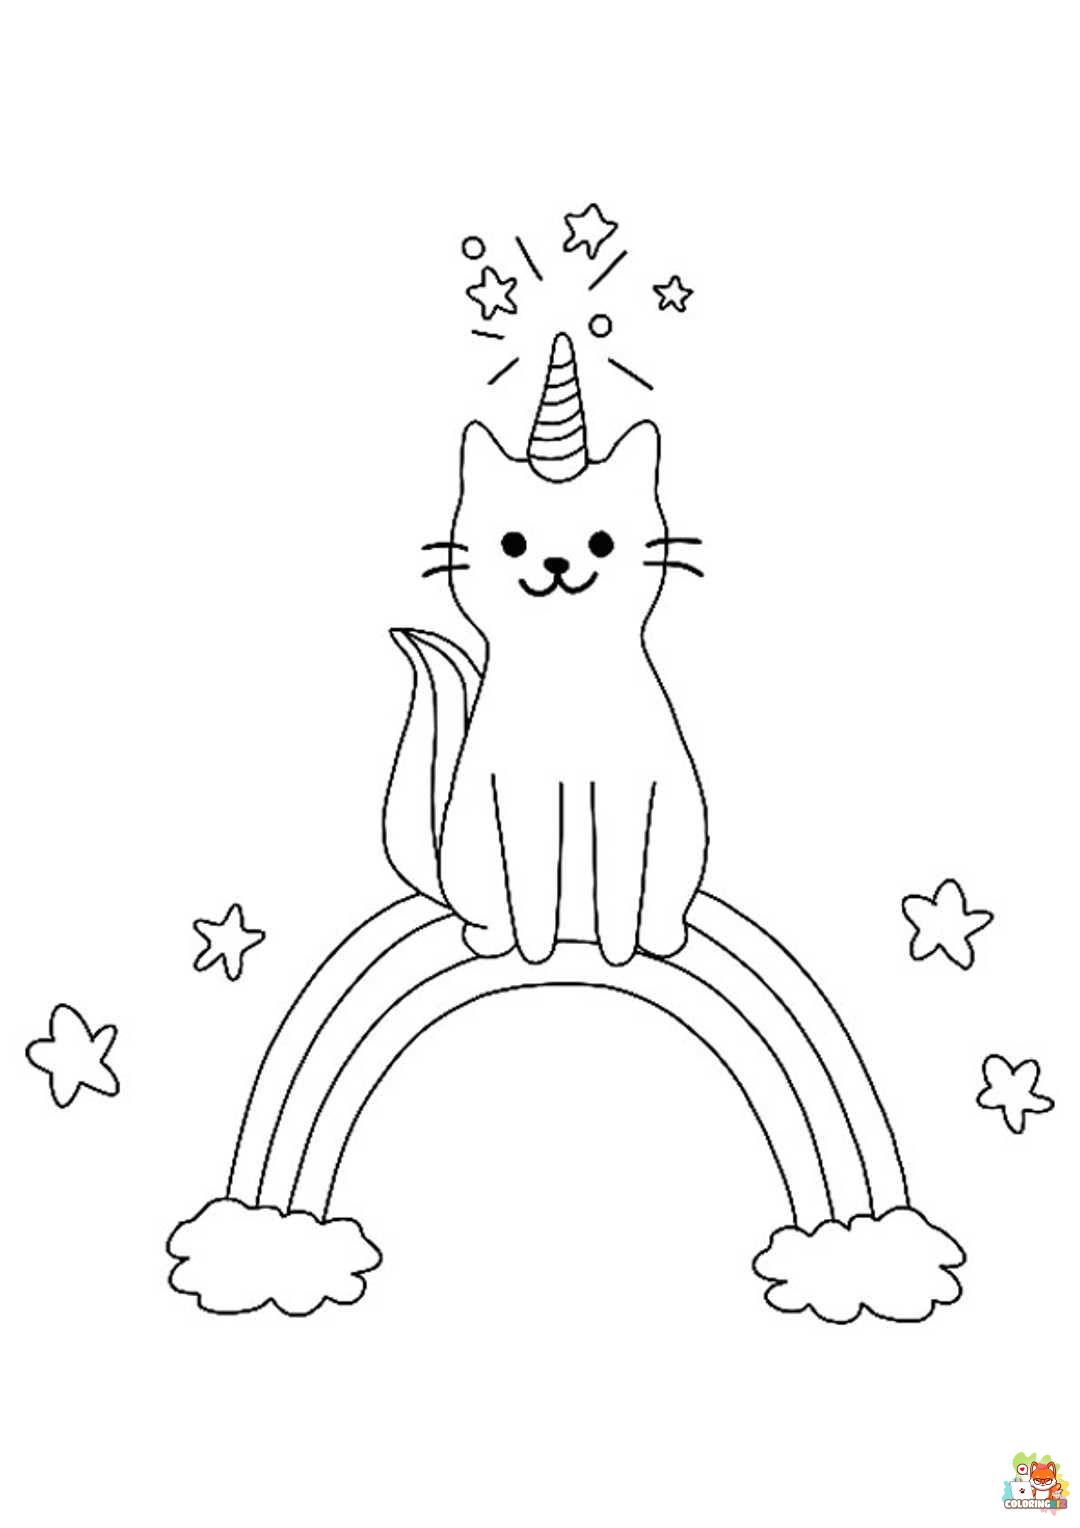 Unicorn Cat on Rainbow Coloring Pages 8